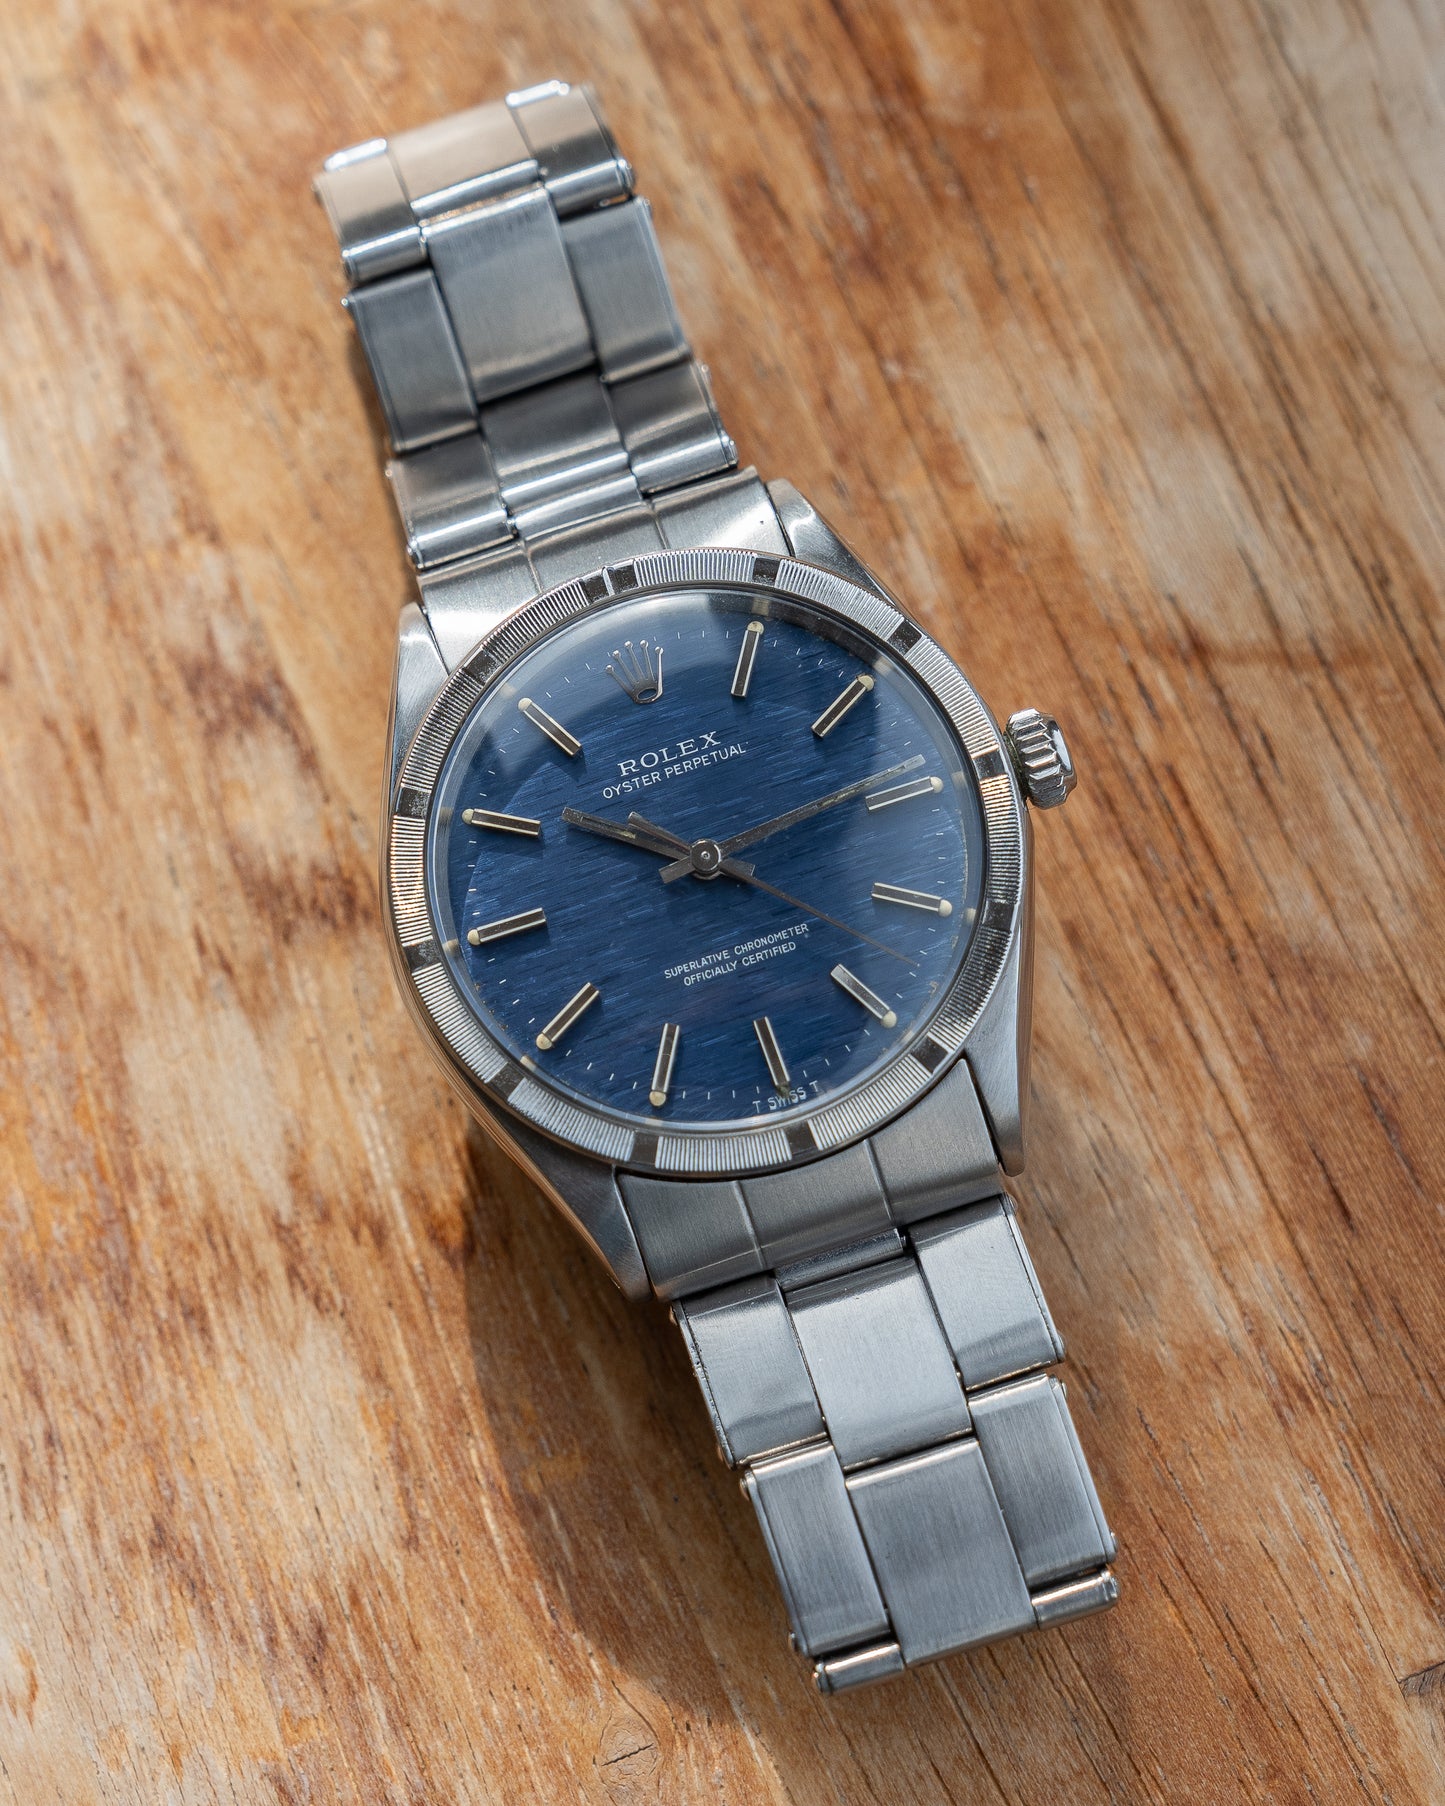 Rolex Oyster Perpetual ref 1007 blue brick dial from 1969